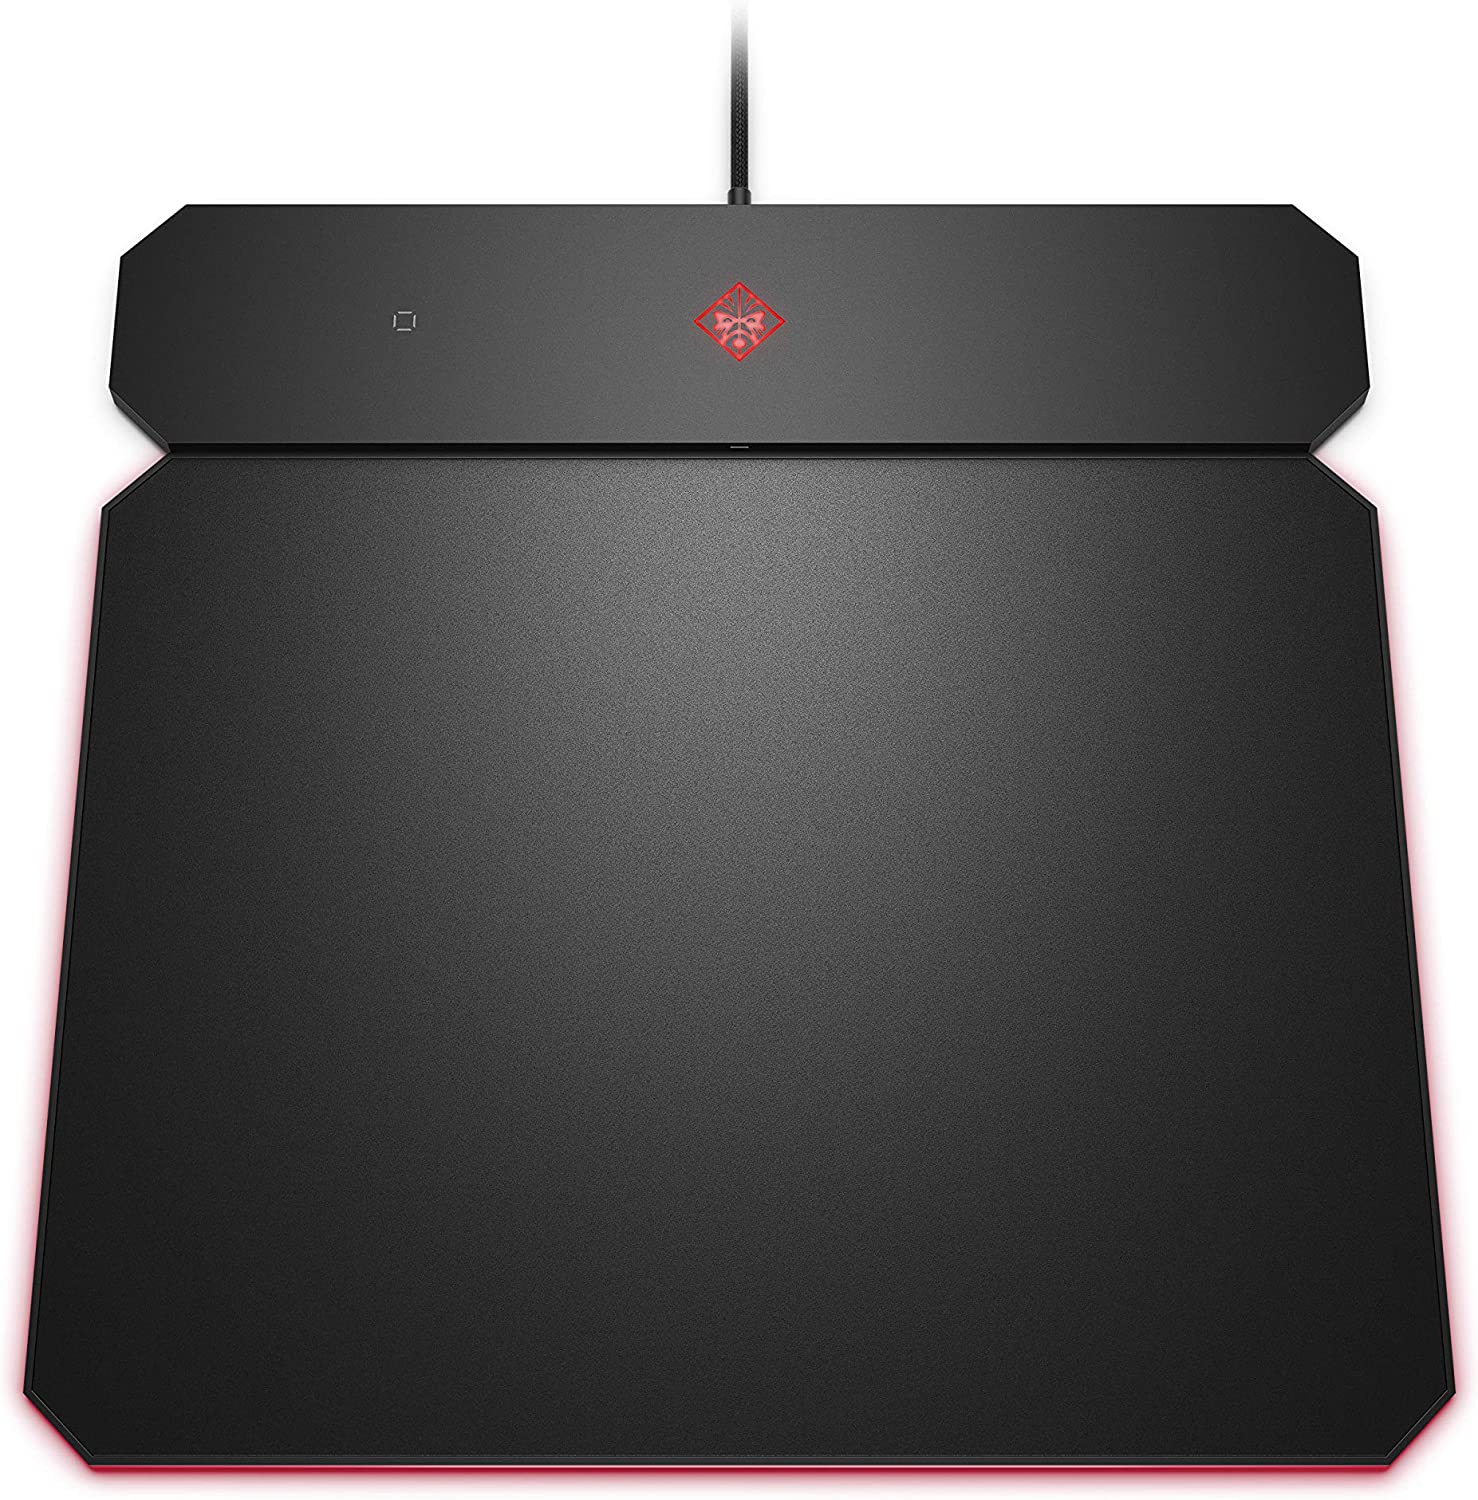 OMEN by HP Outpost Gaming Mouse Pad with Qi Wireless Charging, Custom RGB, and USB-A 2.0 Port, (6CM14AA), Black (6CM14AA#ABL)